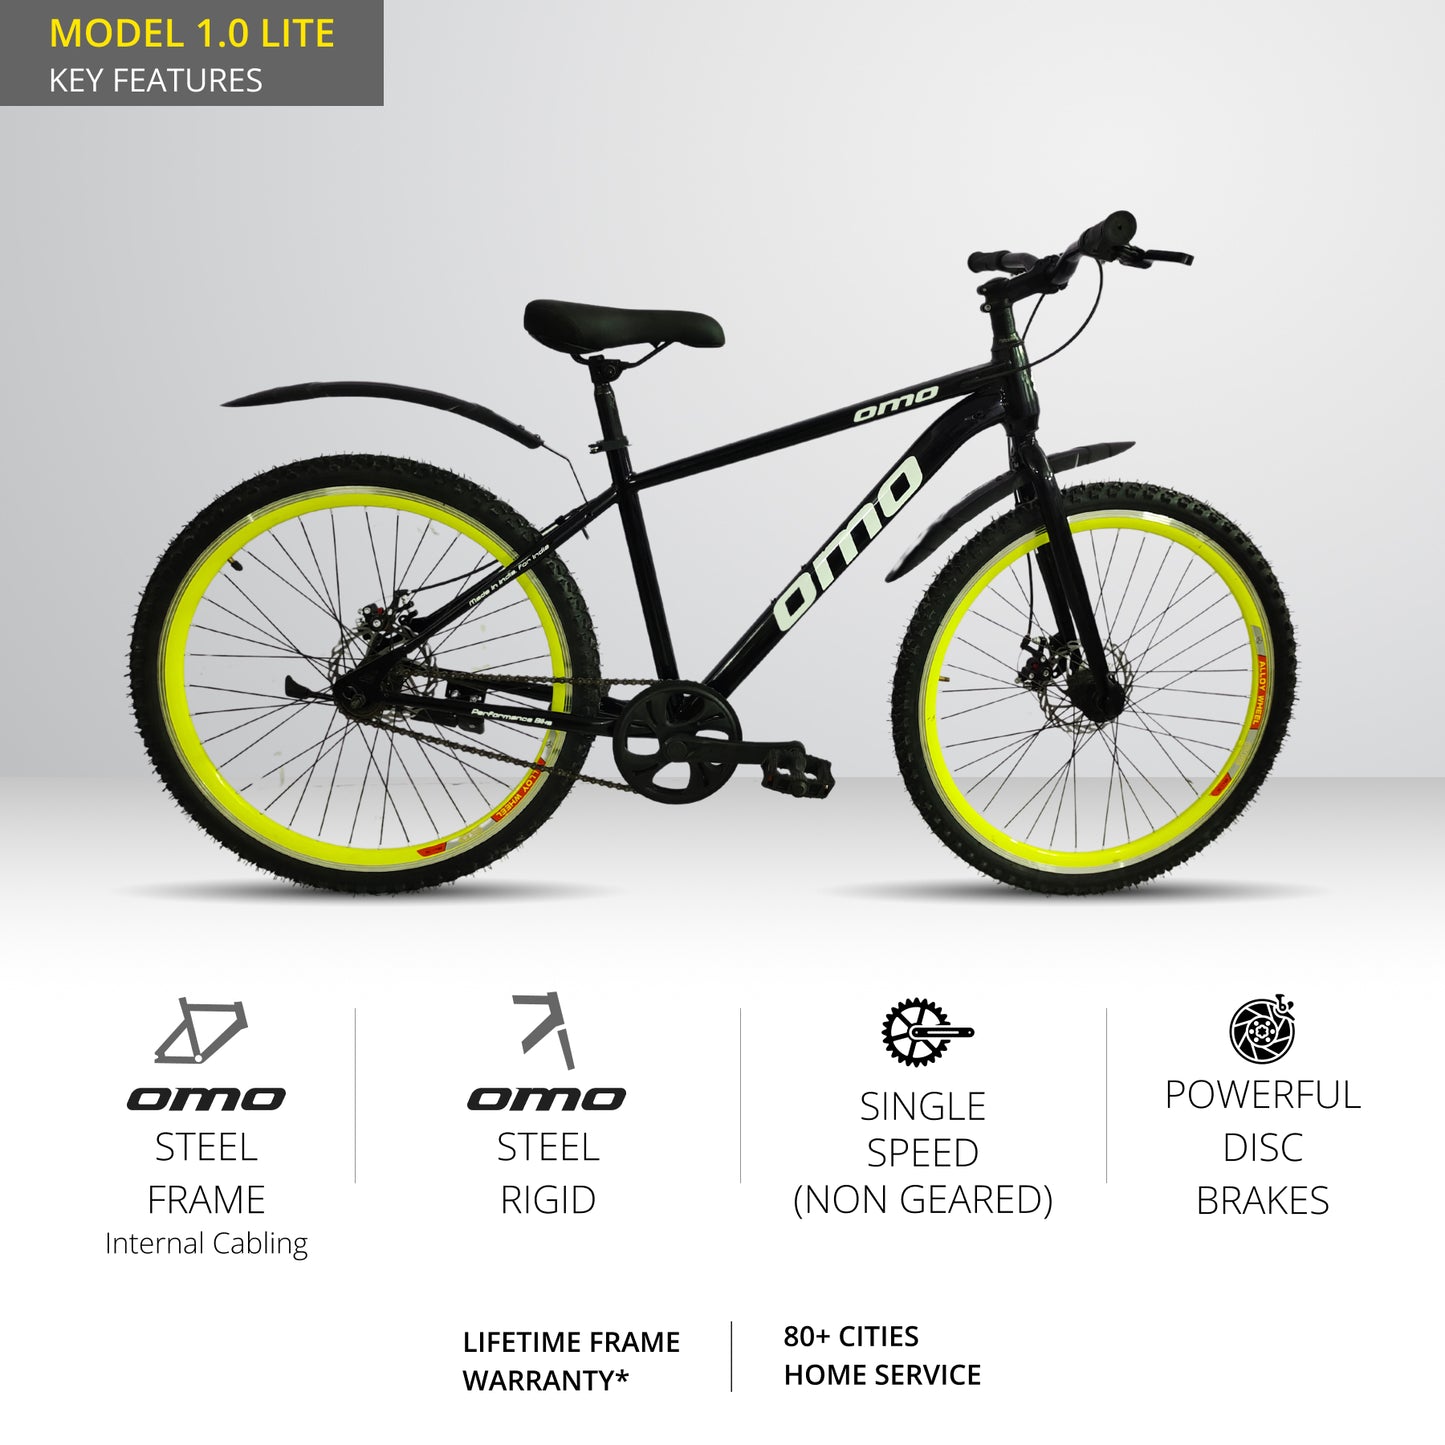 Top-rated affordable men's and adult hybrid bike from Omobikes, Model 1.0 in a stylish green and black color